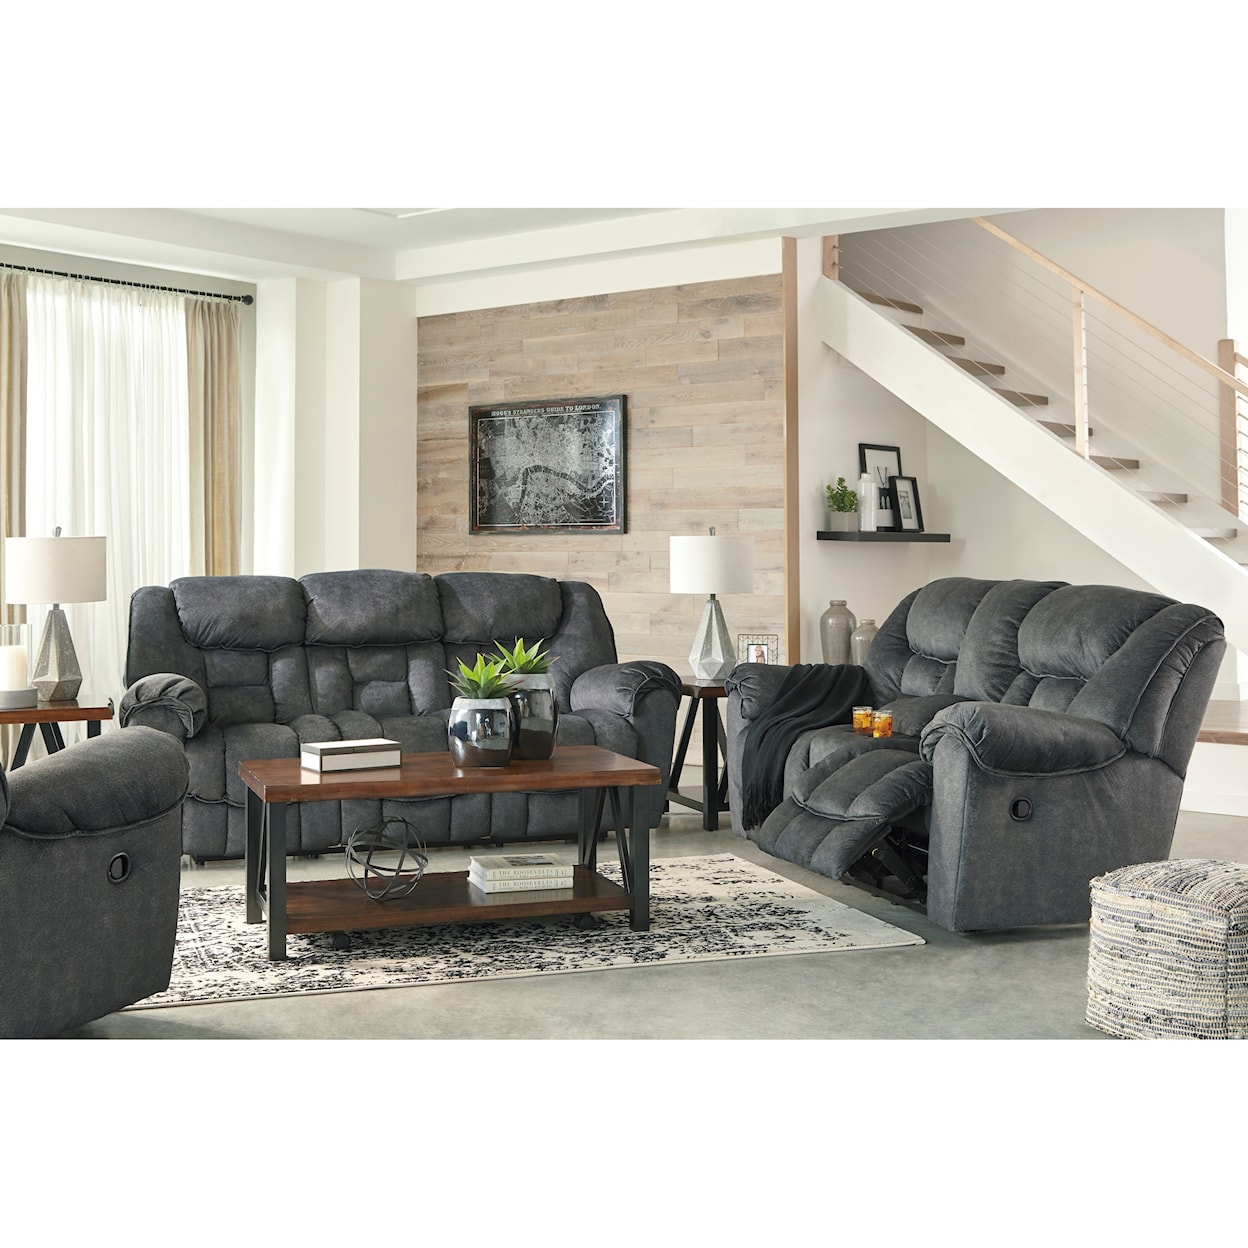 Signature Design Capehorn Reclining Living Room Group